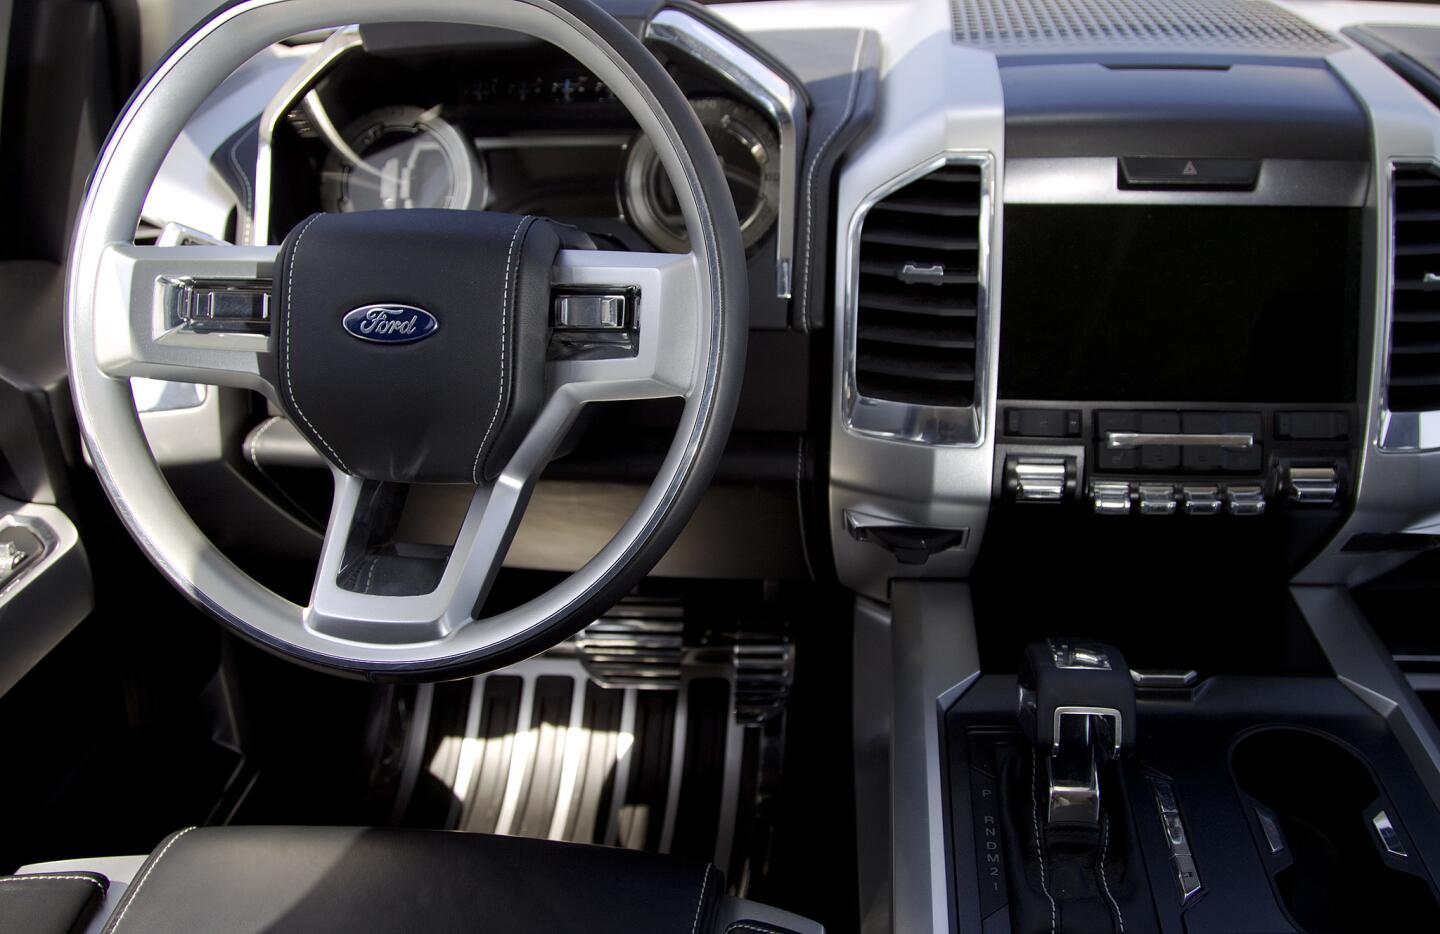 Ford Atlas concept truck